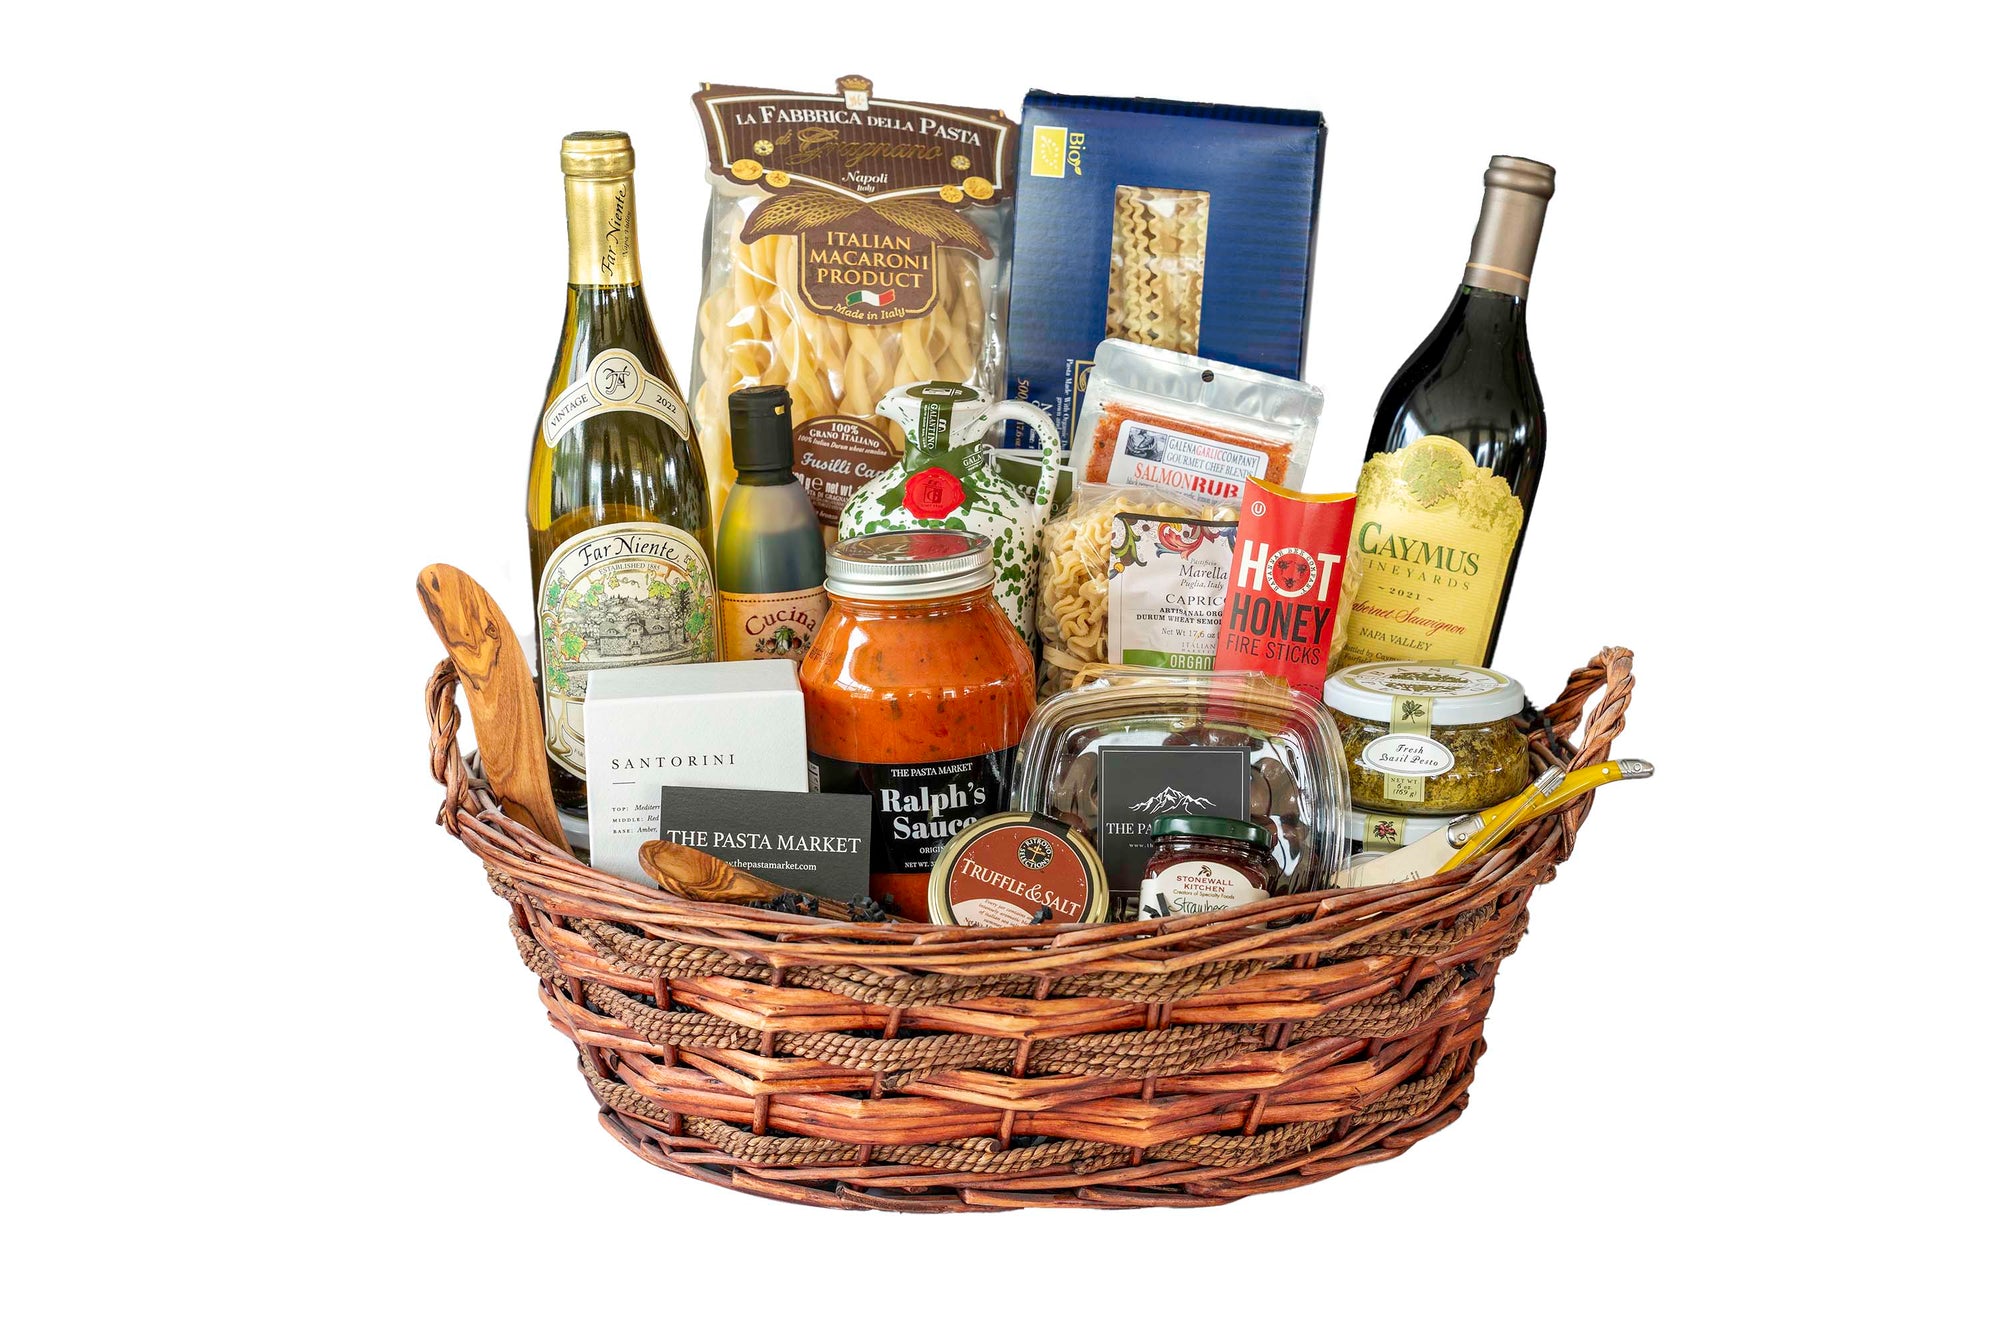 Best Sellers Basket - Extra Large (Call 706-946-4001 to purchase at our Blue Ridge location, must be 21+)